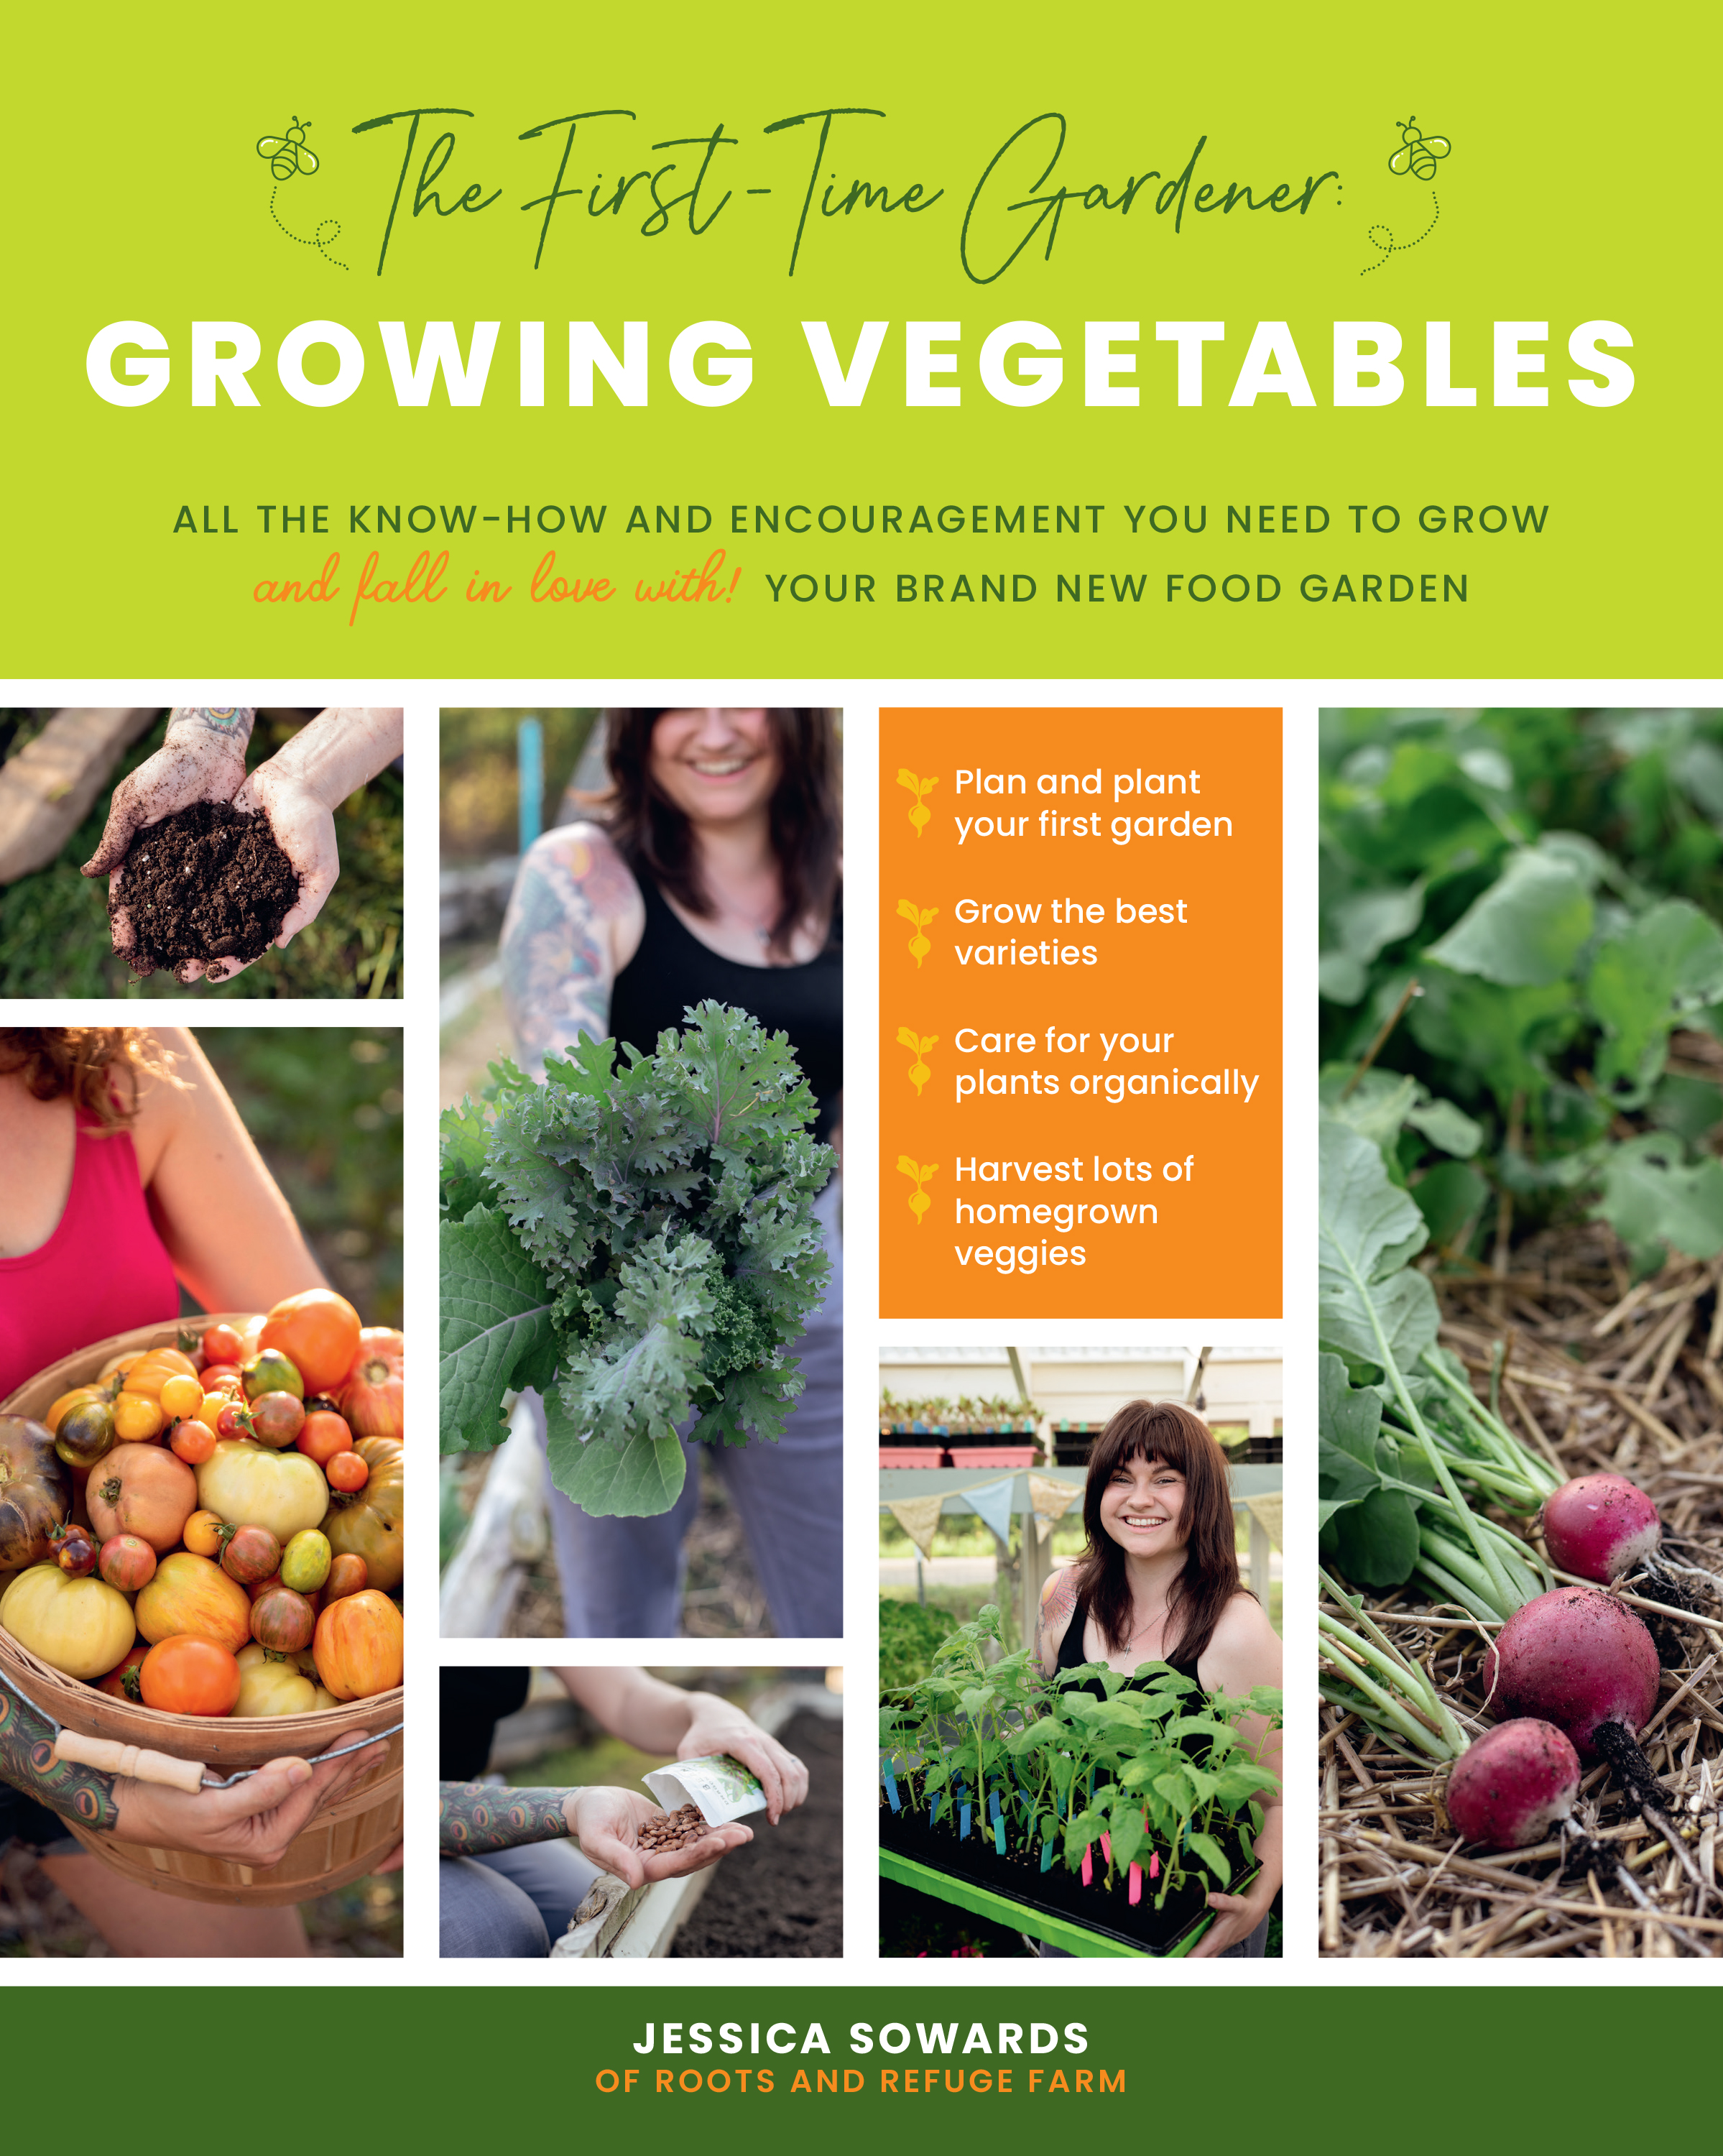 The First-time Gardener: Growing Vegetables [electronic resource] : All the know-how and encouragement you need to grow - and fall in love with! - your brand new food garden